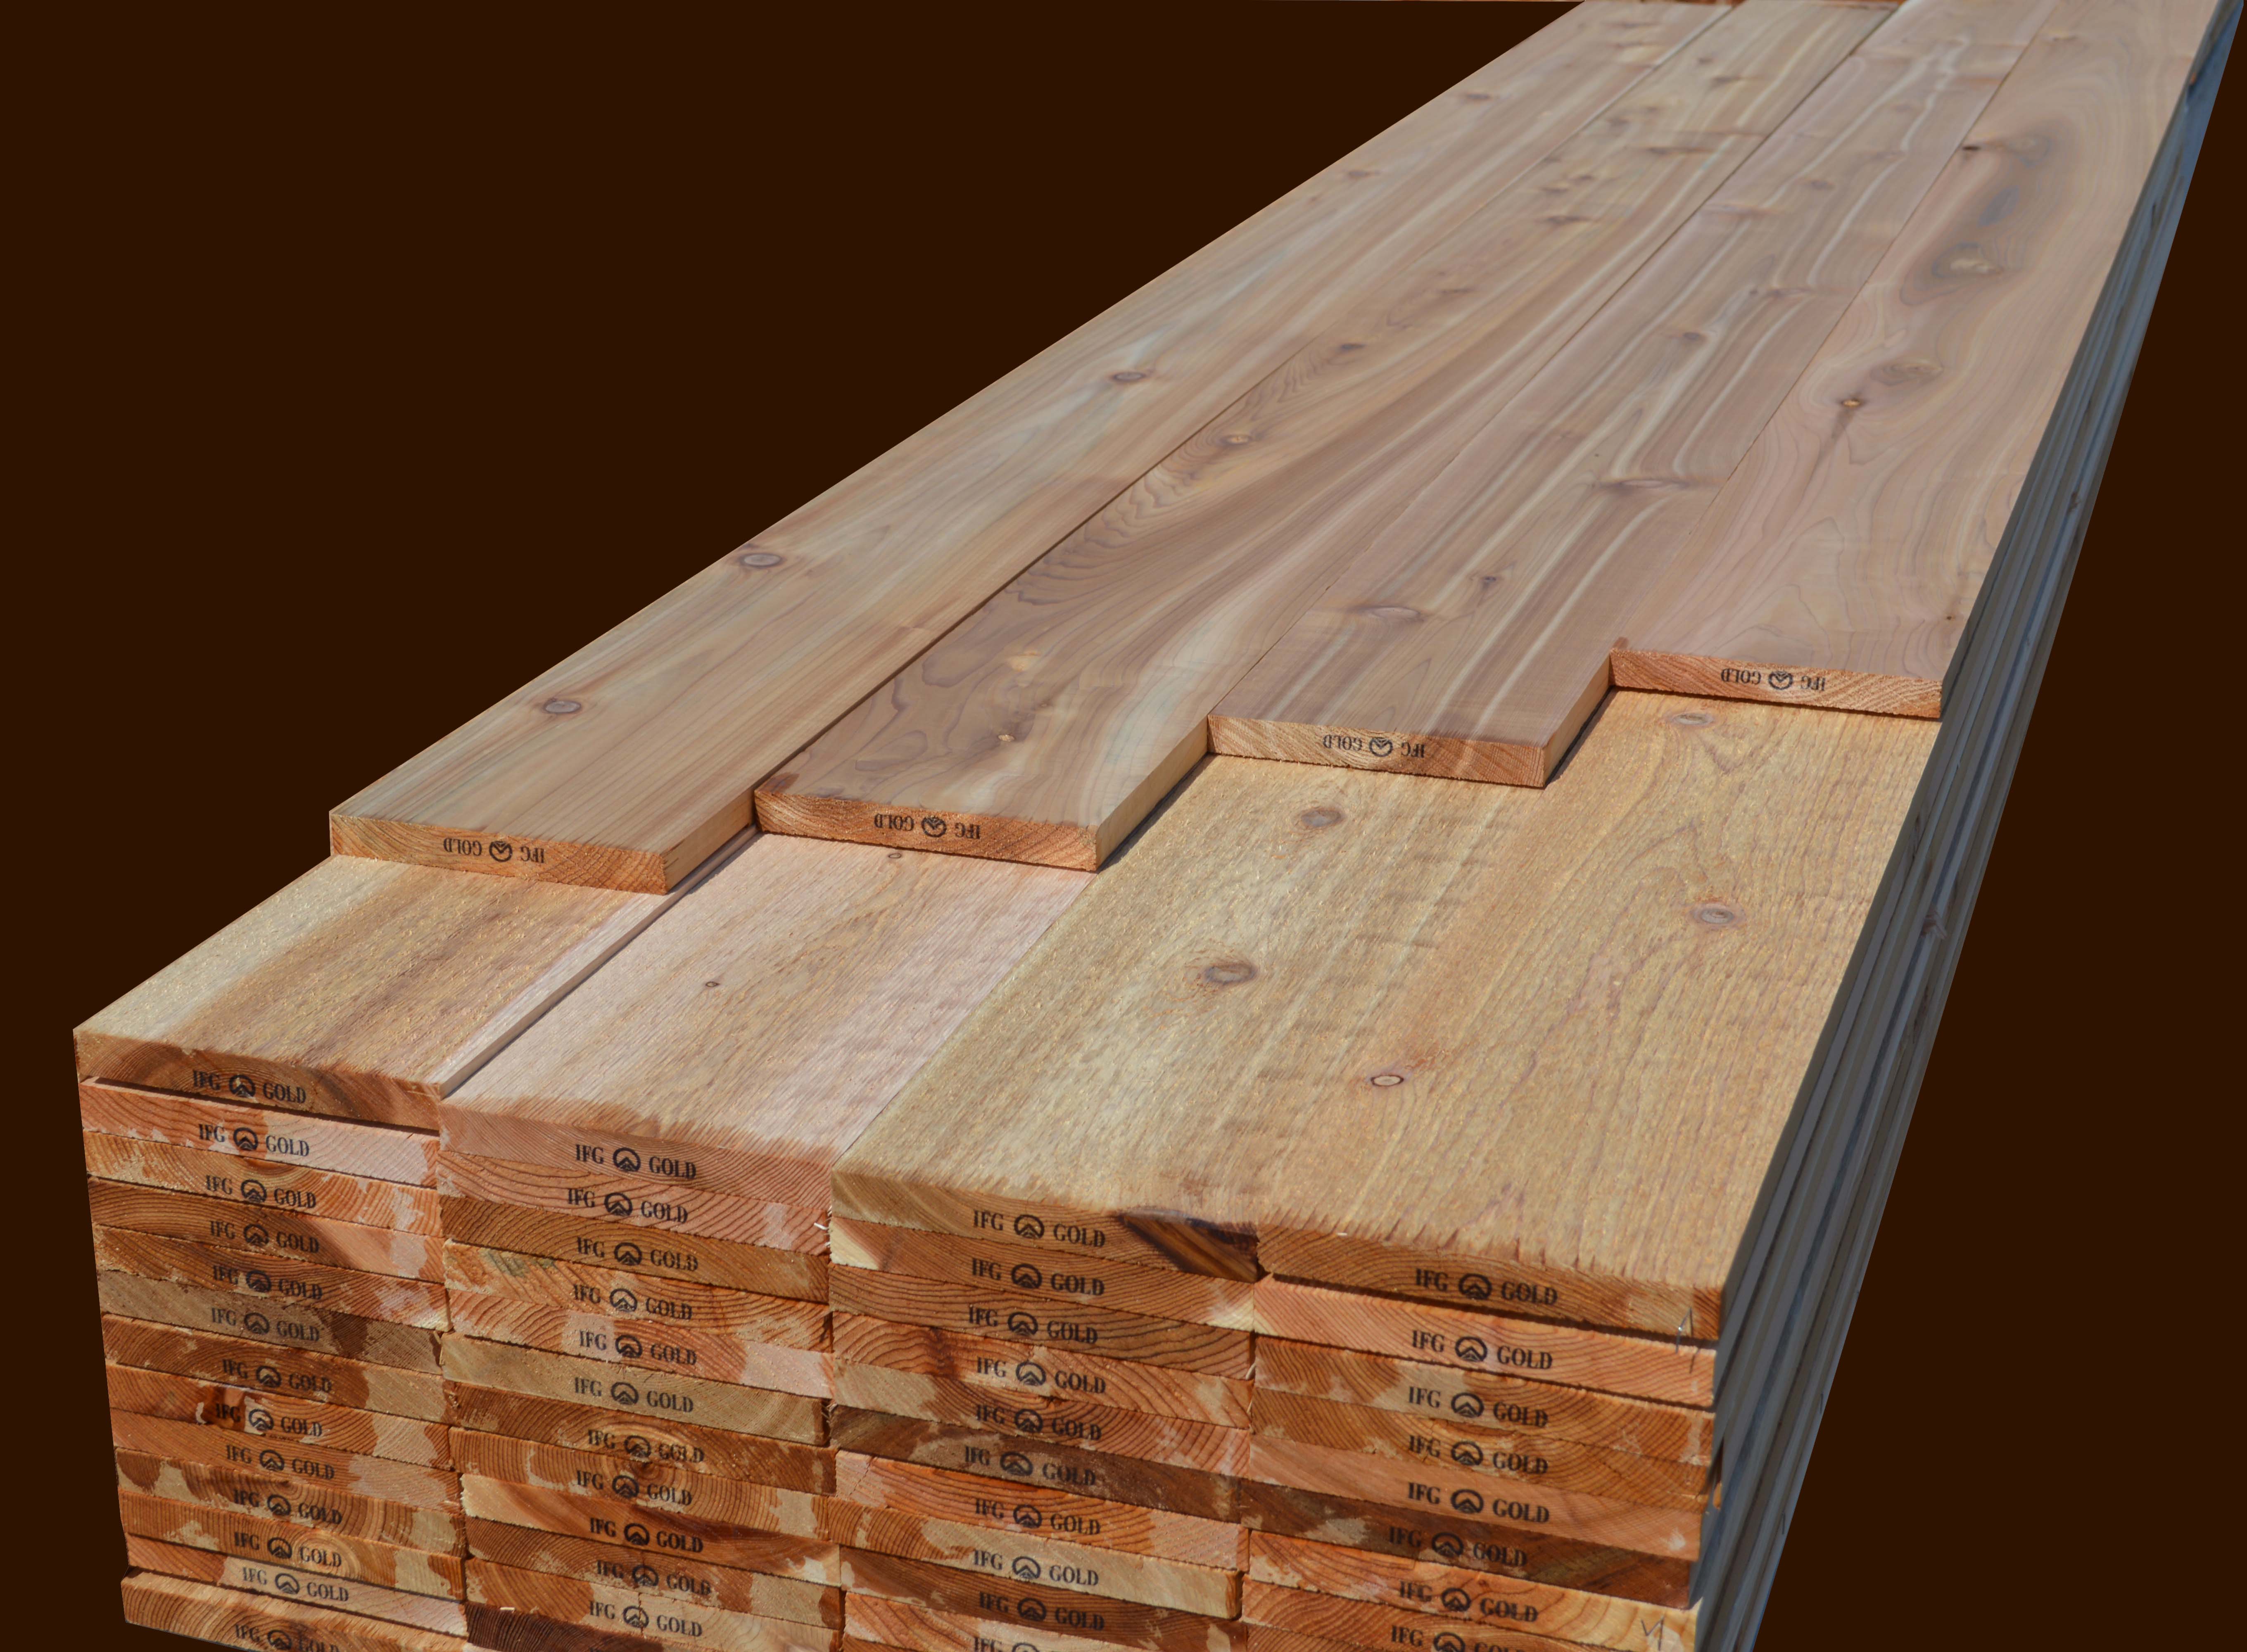 Western Red Cedar | Weekes Forest Products